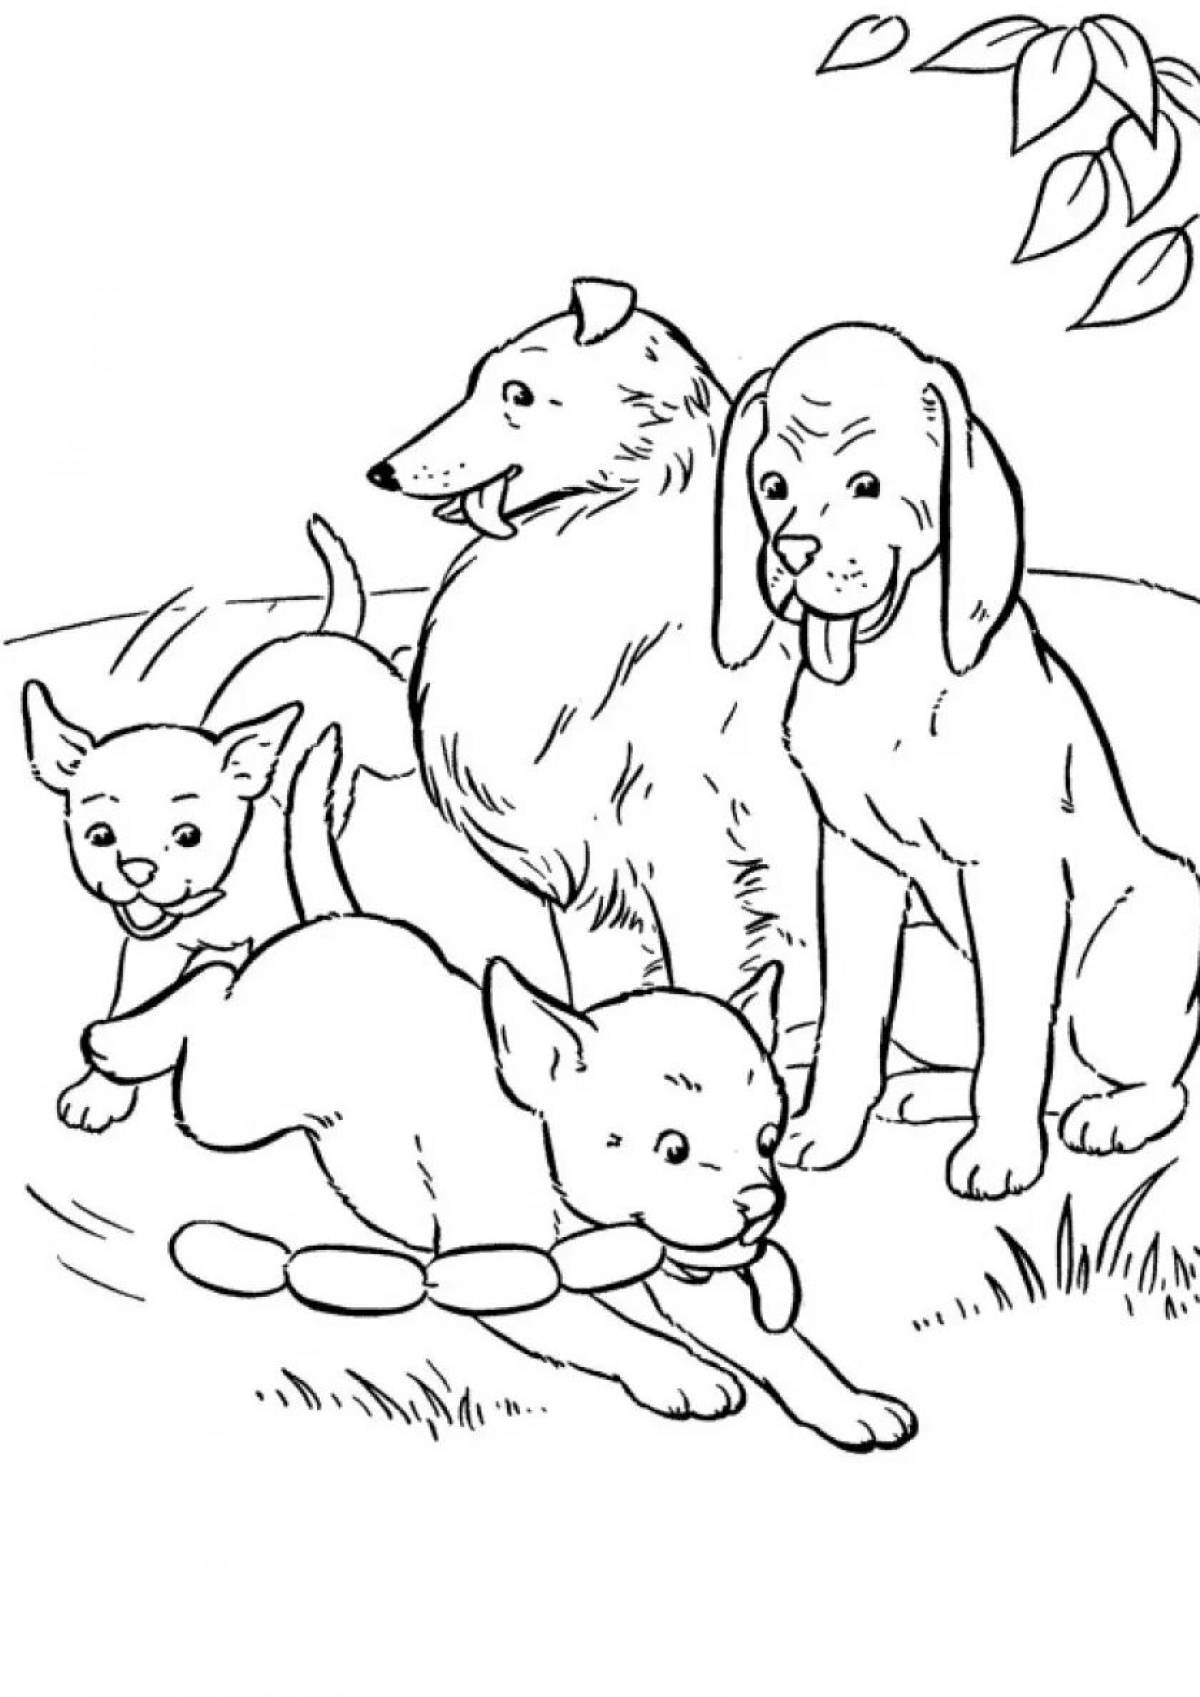 Coloring page snuggling dog family